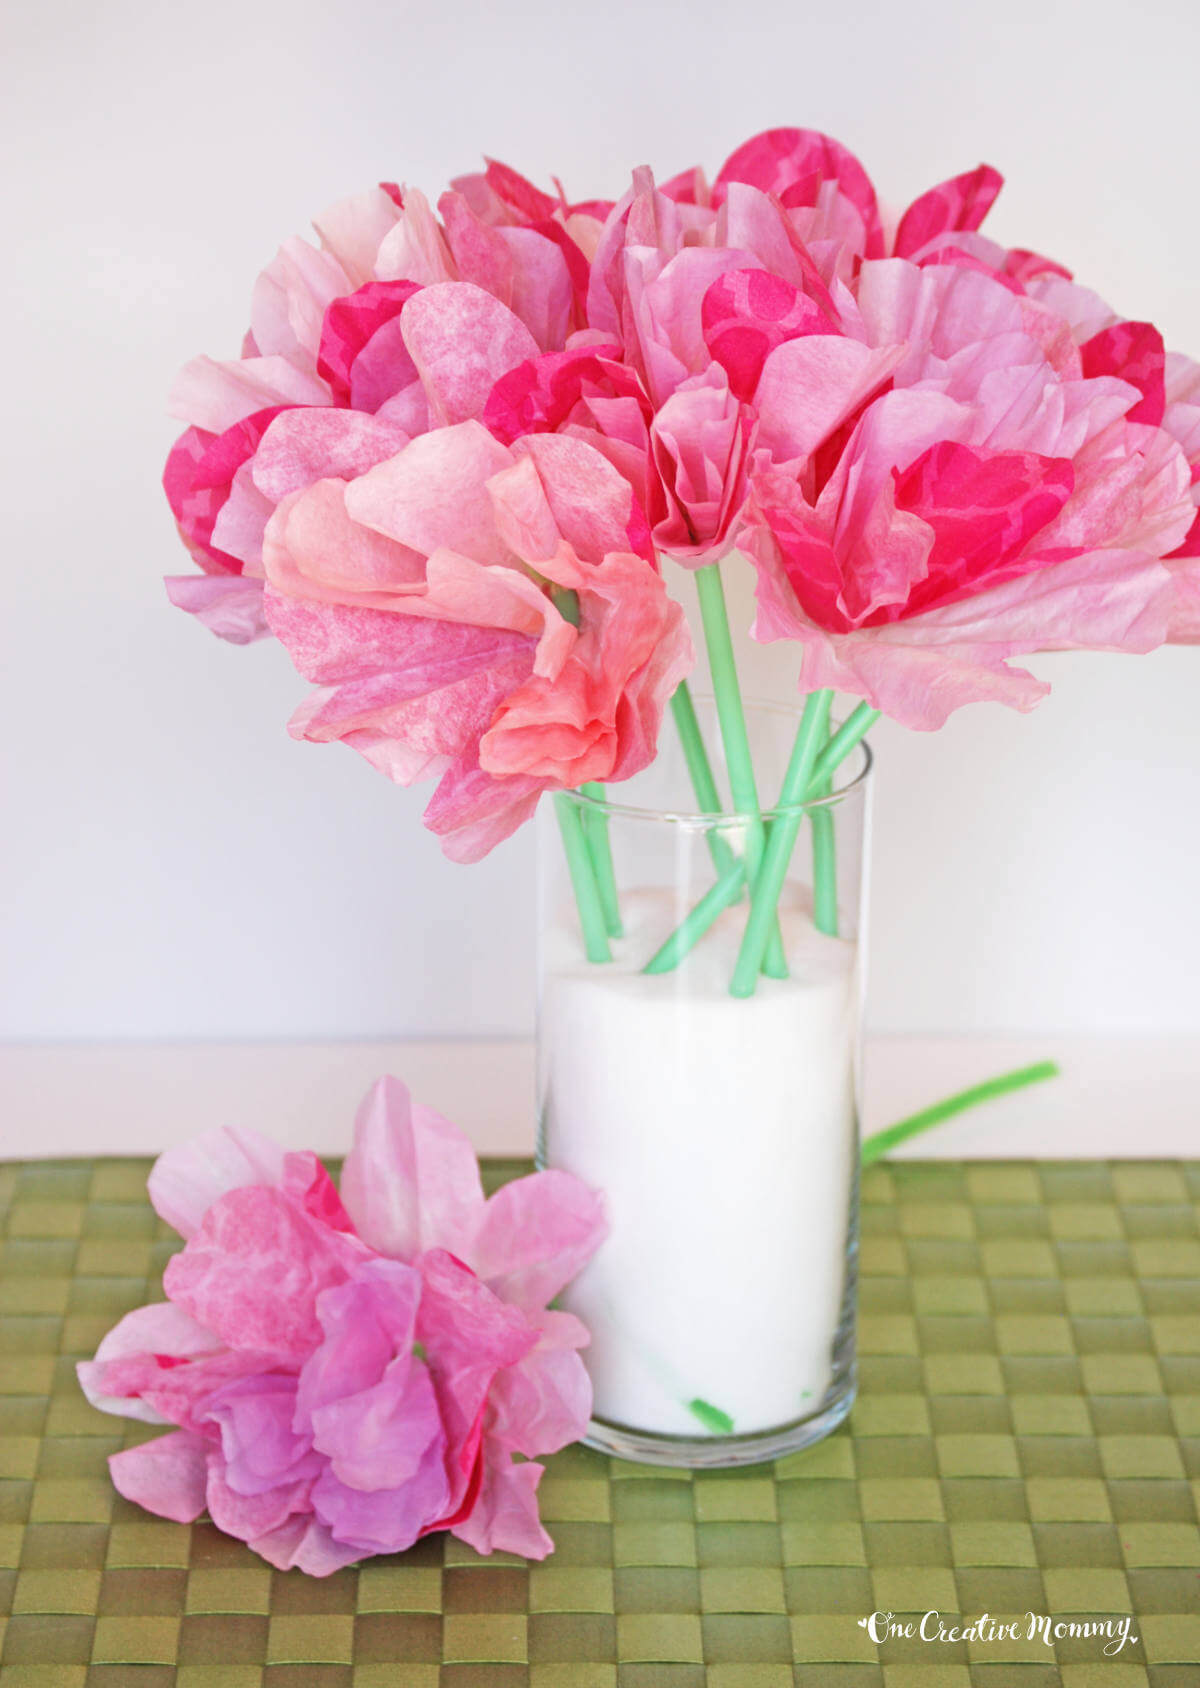 A clear vase filled with white salt holds several pink coffee filter flowers with green stems made from drinking straws.